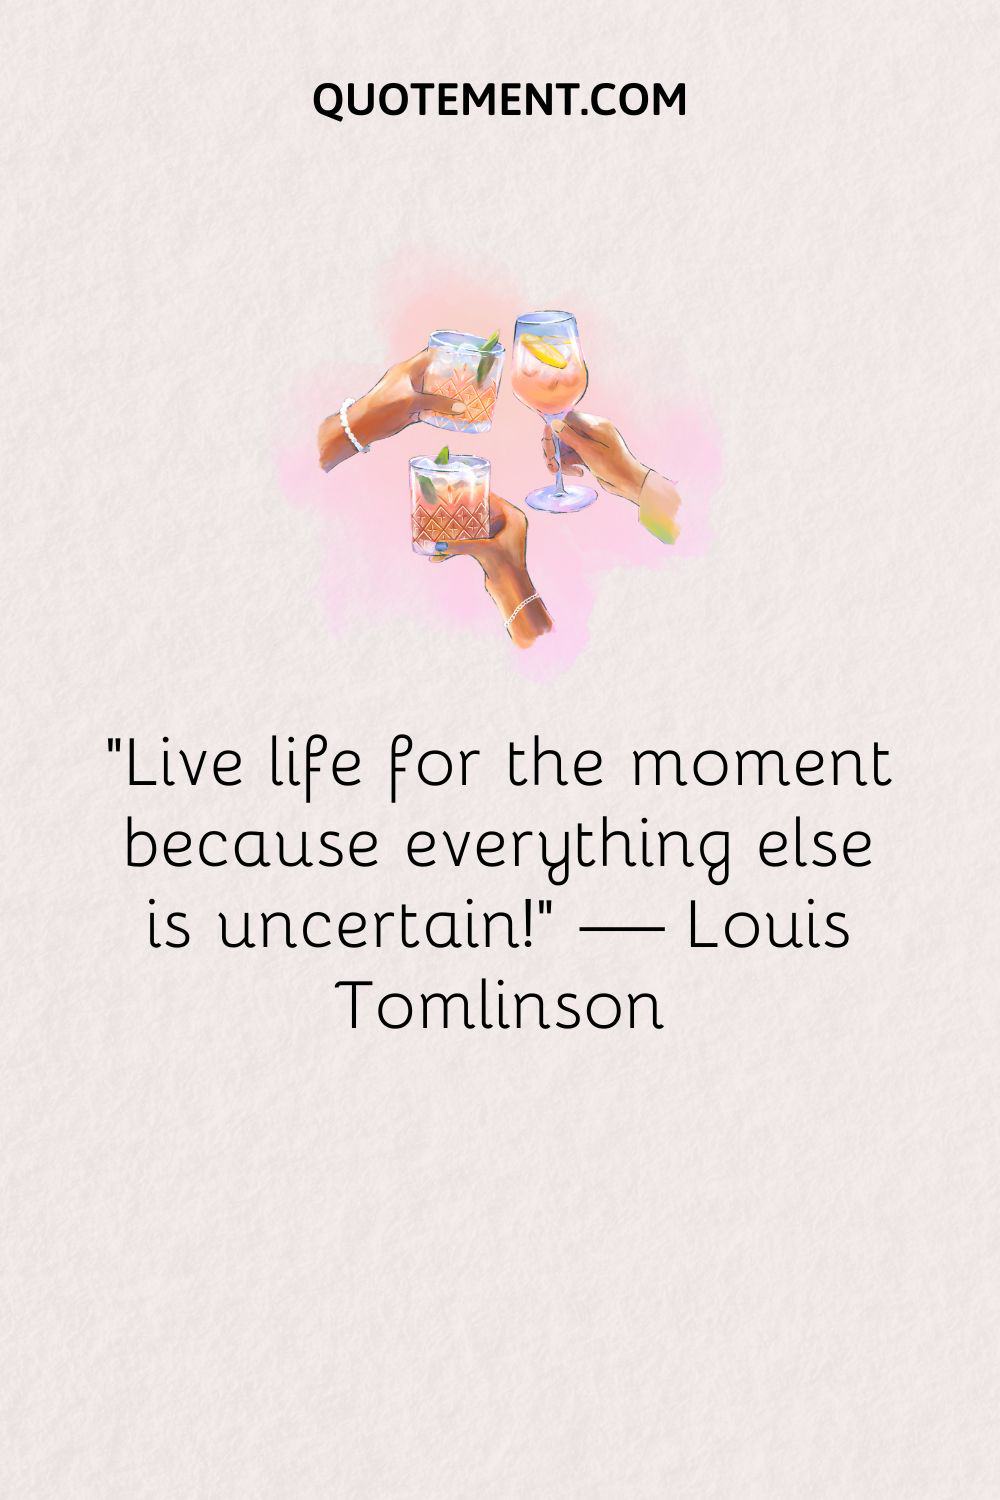 “Live life for the moment because everything else is uncertain!” — Louis Tomlinson